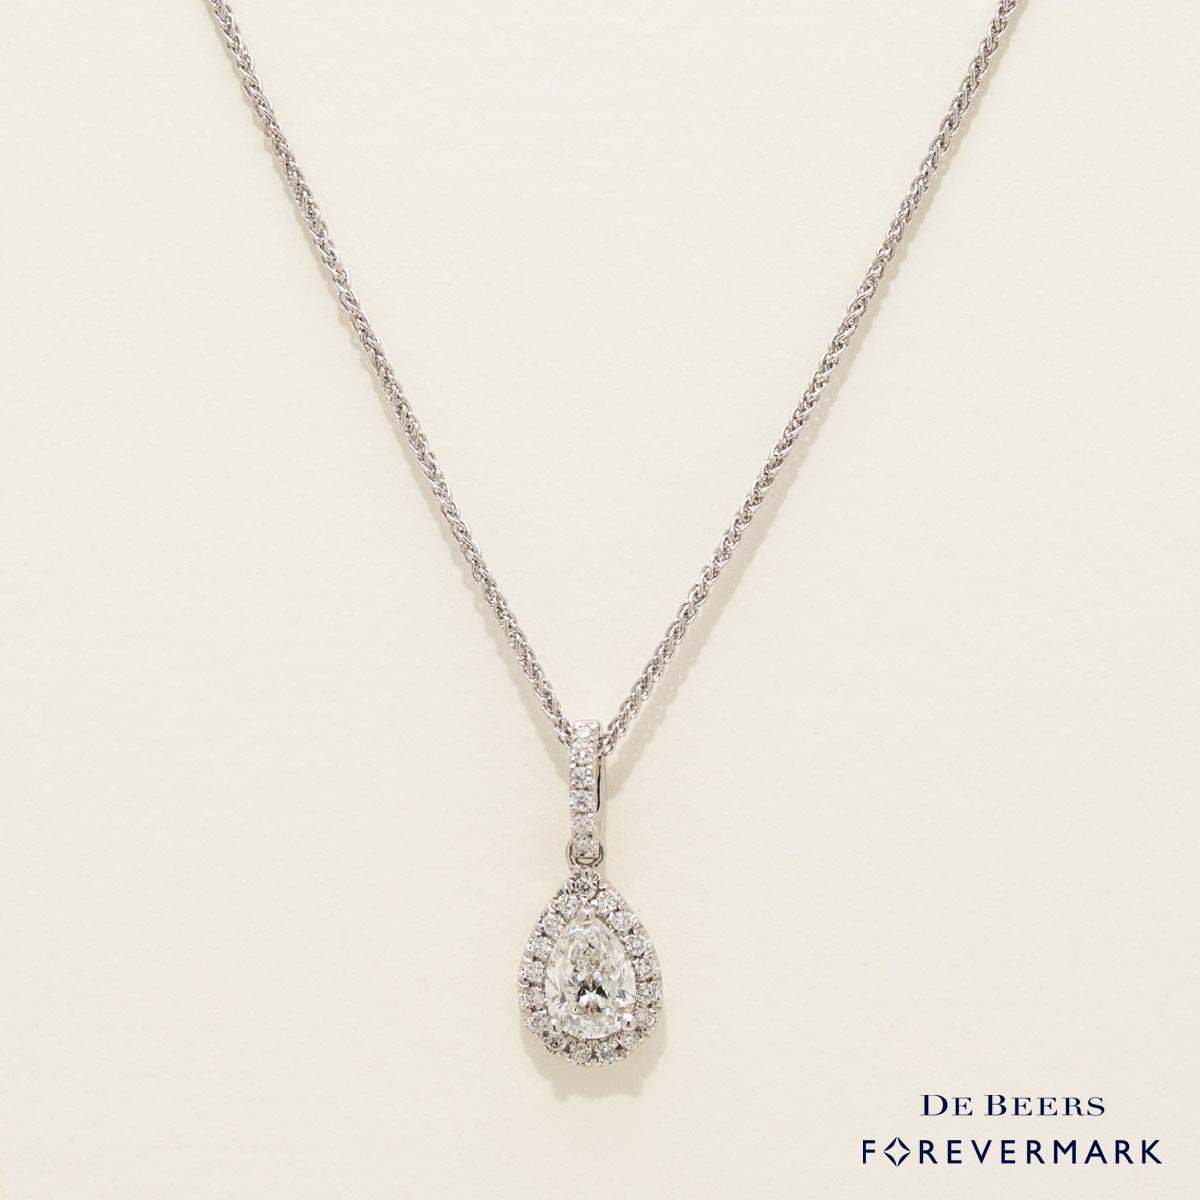 De Beers Forevermark Center of My Universe Pear Shaped Diamond Halo Necklace in 18kt White Gold (3/8ct tw)